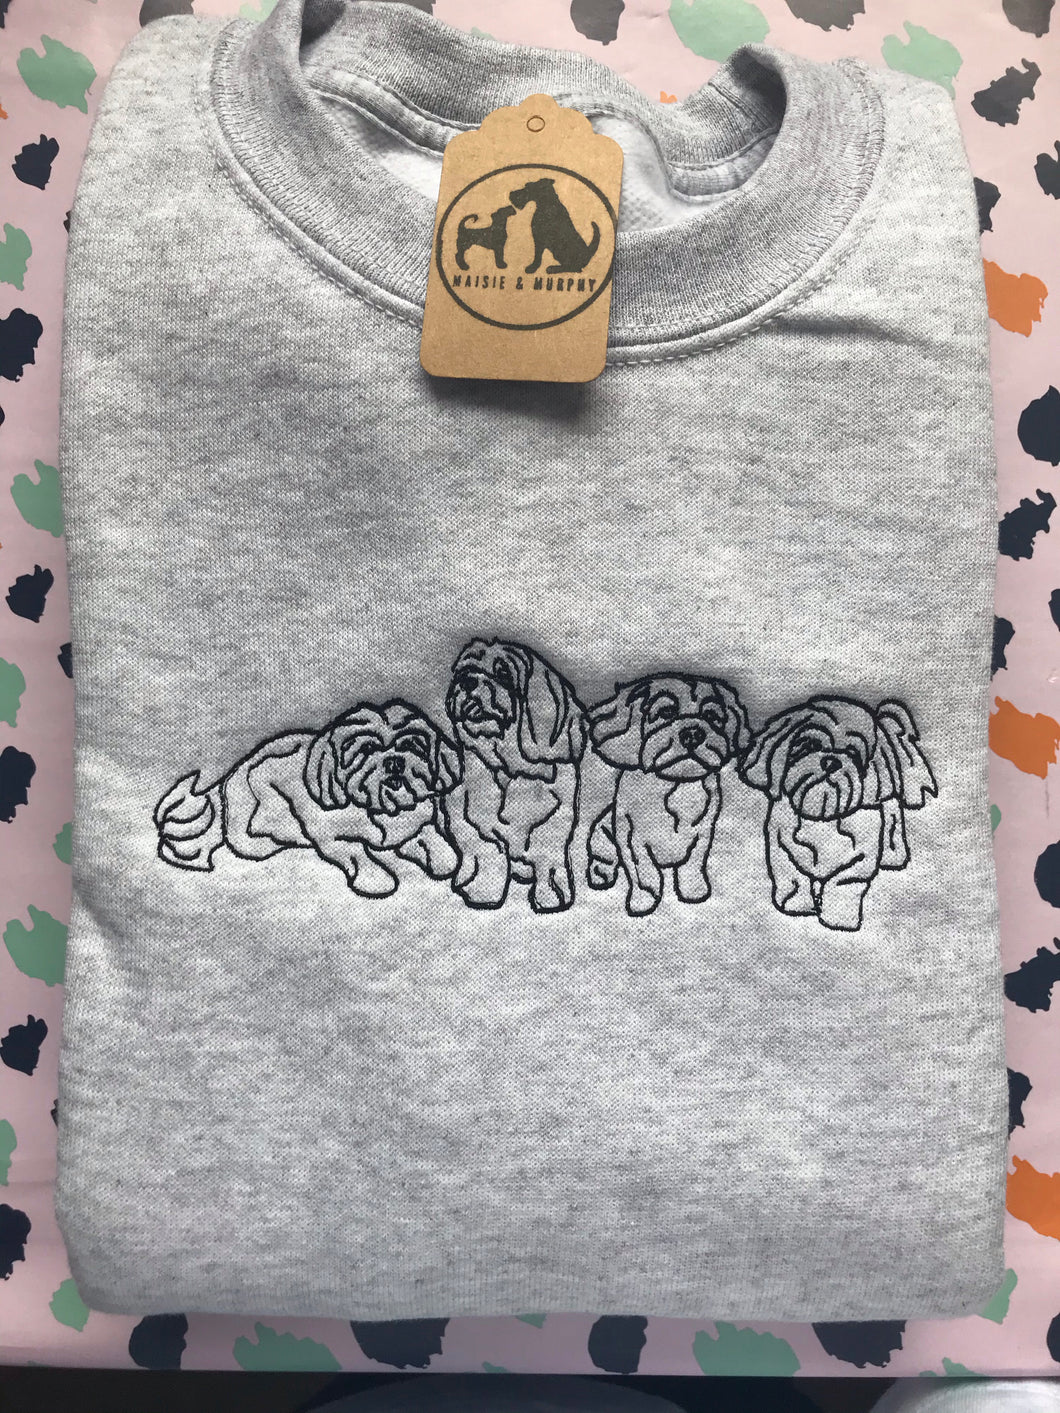 Lhasa Apso Sweatshirt - Gifts for cute dog owners & lovers